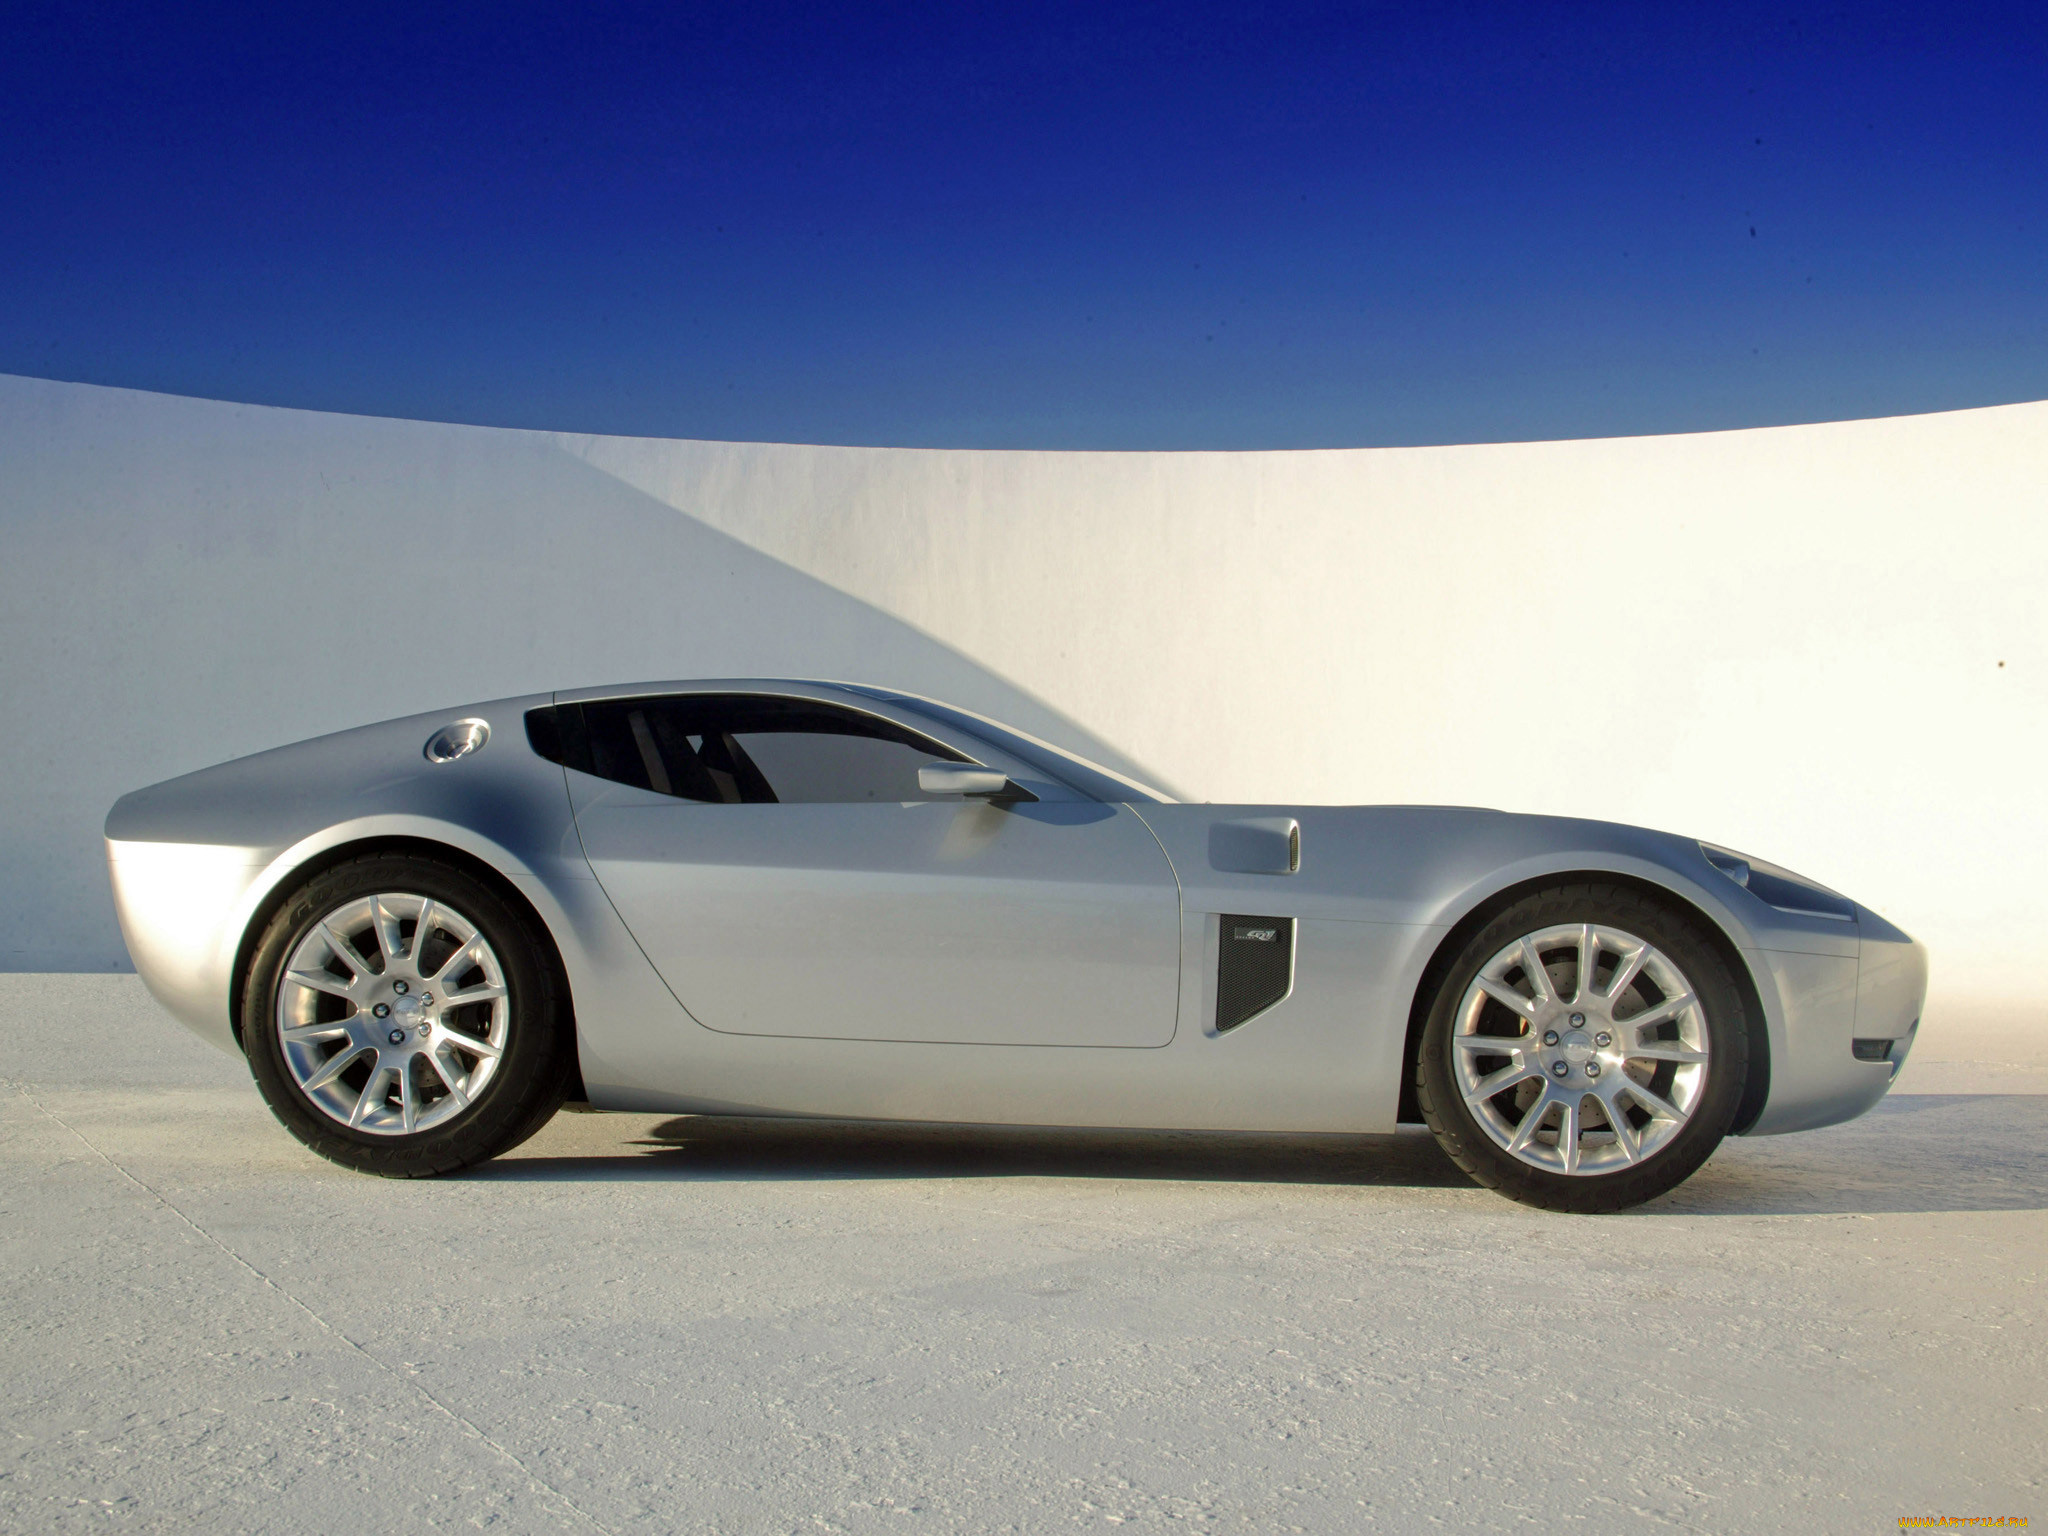 shelby ford gr-1 concept 2005, , ac cobra, shelby, 2005, concept, gr-1, ford